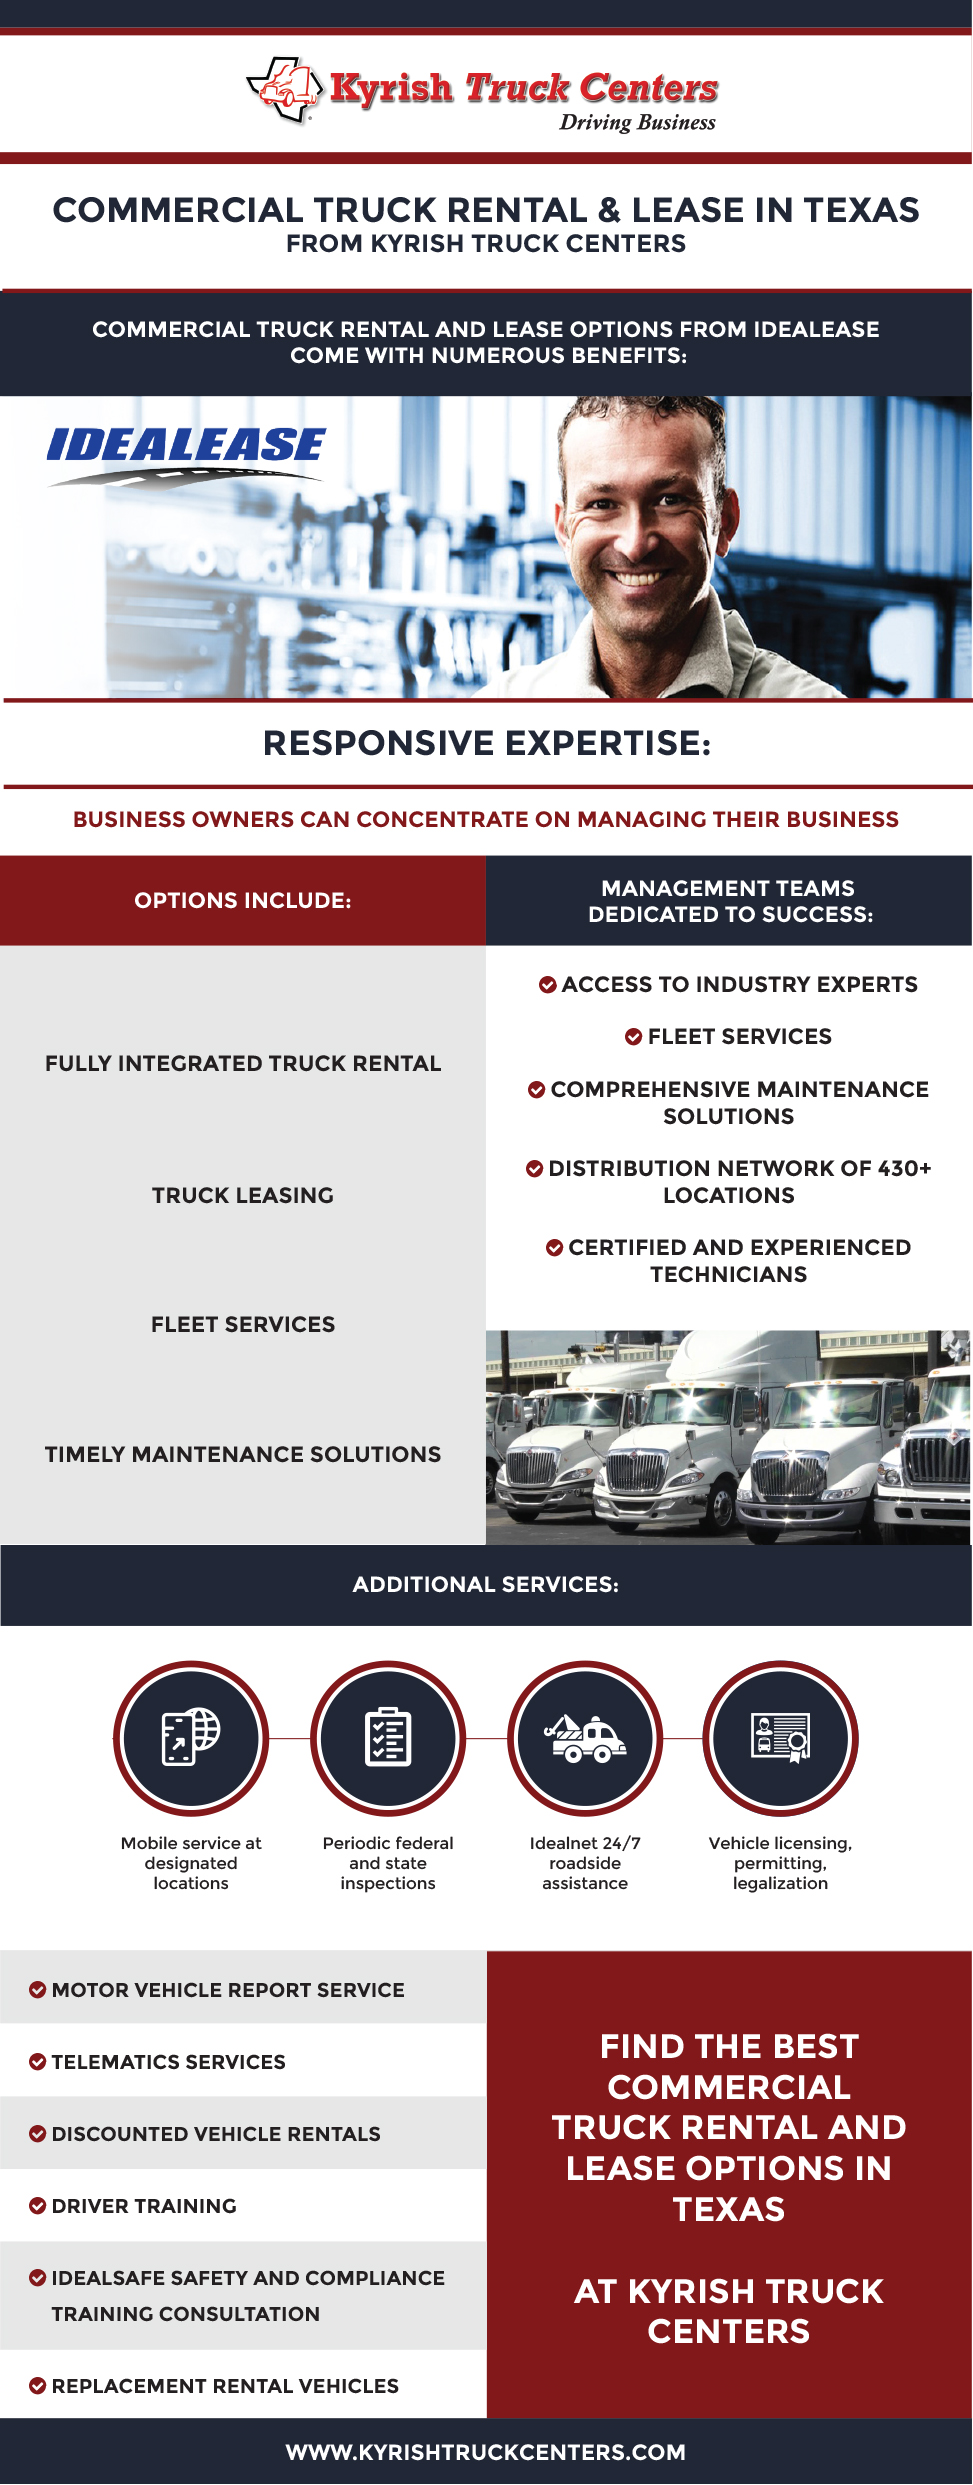 Why You Should Chose a Commercial Truck Rental or Leasing Provider